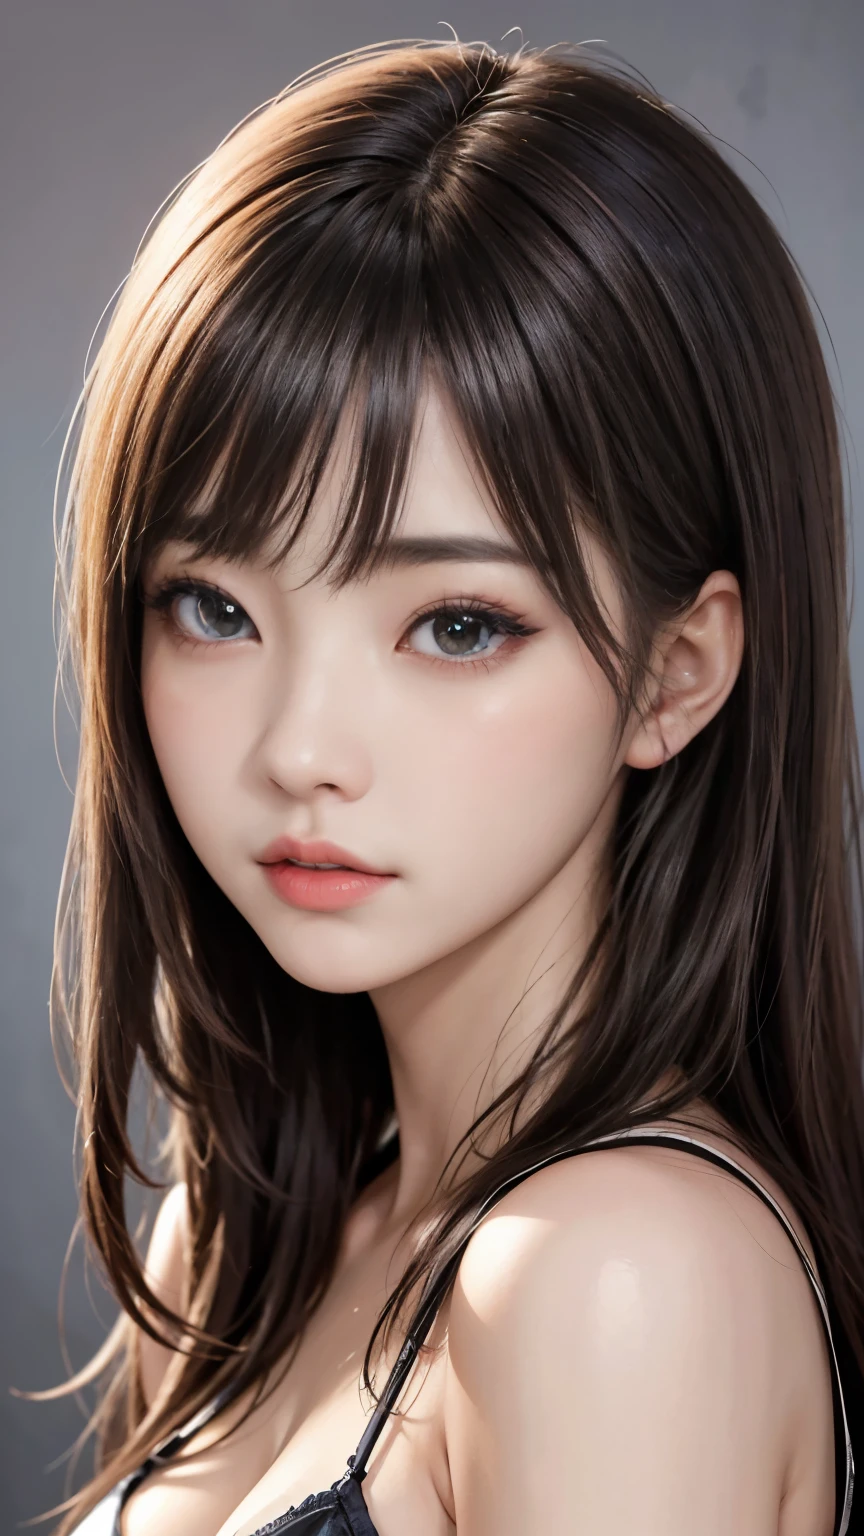 (highest qualityのディテール)、Realistic、8k Ultra HD、High resolution、(One Girl:1.2),(Fatal Beauty,Attractive beauty) ,(A supple and powerful physique),(Sensual charm),(Mysterious charm:1.1),(Captivating silhouette),The Super detailed、High quality textures、Intricate details、detailed、Very detailed CG、High quality shadows、detailed Beautiful and delicate face、detailed Beautiful and delicate eyes、Written boundary depth、Ray Tracing、20th generation、Cute K-Pop Girls、(The Face of Ulzan in Korea)、Thin face、(URZAN-6500-v1.1:0.6)、PurerosFace_v1、Glowing Eyes、Perfect body、 Viewer Display、(highest qualityのディテール:1.2)、Realistic、8k Ultra HD、High resolution、Woman close up， realistic girl rendering, 8k artistic german bokeh, Enchanting girl, Real Girls, Gurwitz, Gurwitz-style artwork, Girl Roleplay, Realistic 3D style, cgstation Popular Topics,, 8K Portrait Rendering,（truth，truth：1.4），(A girl with sparkling eyes:1.2)、The Super detailed、High quality textures、Intricate details、detailed、Very detailed CG、High quality shadows、detailed Beautiful and delicate face、detailed Beautiful and delicate eyes、Written boundary depth、Ray Tracing、20th generation、Cute K-Pop Girls、(The Face of Ulzan in Korea)、Thin face、(URZAN-6500-v1.1:0.6)、cheek、Glossy Lips、、High resolution, Best image quality, highest quality, Realistic, Super detailed, Photo Real, 4K 8k Ultra HD Full Color RAW Photos, Fujifilm(Medium format), hasselblad, Carl Zeiss, Incredible dynamic range photography(utility_art：Smooth-768:1.1),High resolution, High pixel count, Clear detailed, Clear images, Natural color reproduction, Noise Reduction, High fidelity, quality, Software Improvements, Upscaling, Optimized Algorithms, Professional-level retouching,

1. Oversized coat:

The coat is、Choose an oversized design that covers from shoulders to knees.。Color is classic navy or black、or warm khaki or beige, wait.、Choose colors that match the season。
2. Knitted sweater or turtleneck:

To protect yourself from the cold、Choose a knitted sweater or turtleneck。Match the texture and color of the knit to the coat.。
3. Wide leg pants:

For pants, Choose a wide-leg design、Combines ease of movement and style。Denim in dark tones or black trousers will look good.。
4. Knee-high boots:

What is included in an oversized coat、Pair with knee-high boots that cover your ankles and calves。Boots are black or dark brown and chic.、Gives a stylish impression。
5. accessories:

Choose simple gold or silver accessories、Add elegance to your outfit。for example、Long necklaces and large earrings are recommended.。
6. Handbags:

Handbags、Choose a color that matches the tone of your outfit.。Shoulder bags and tote bags are convenient and stylish。
7. Compensation and hairstyle:

Compensate, Choose natural colors that flatter your skin。Wavy Hair、By creating loose curls、Appeal to softness。